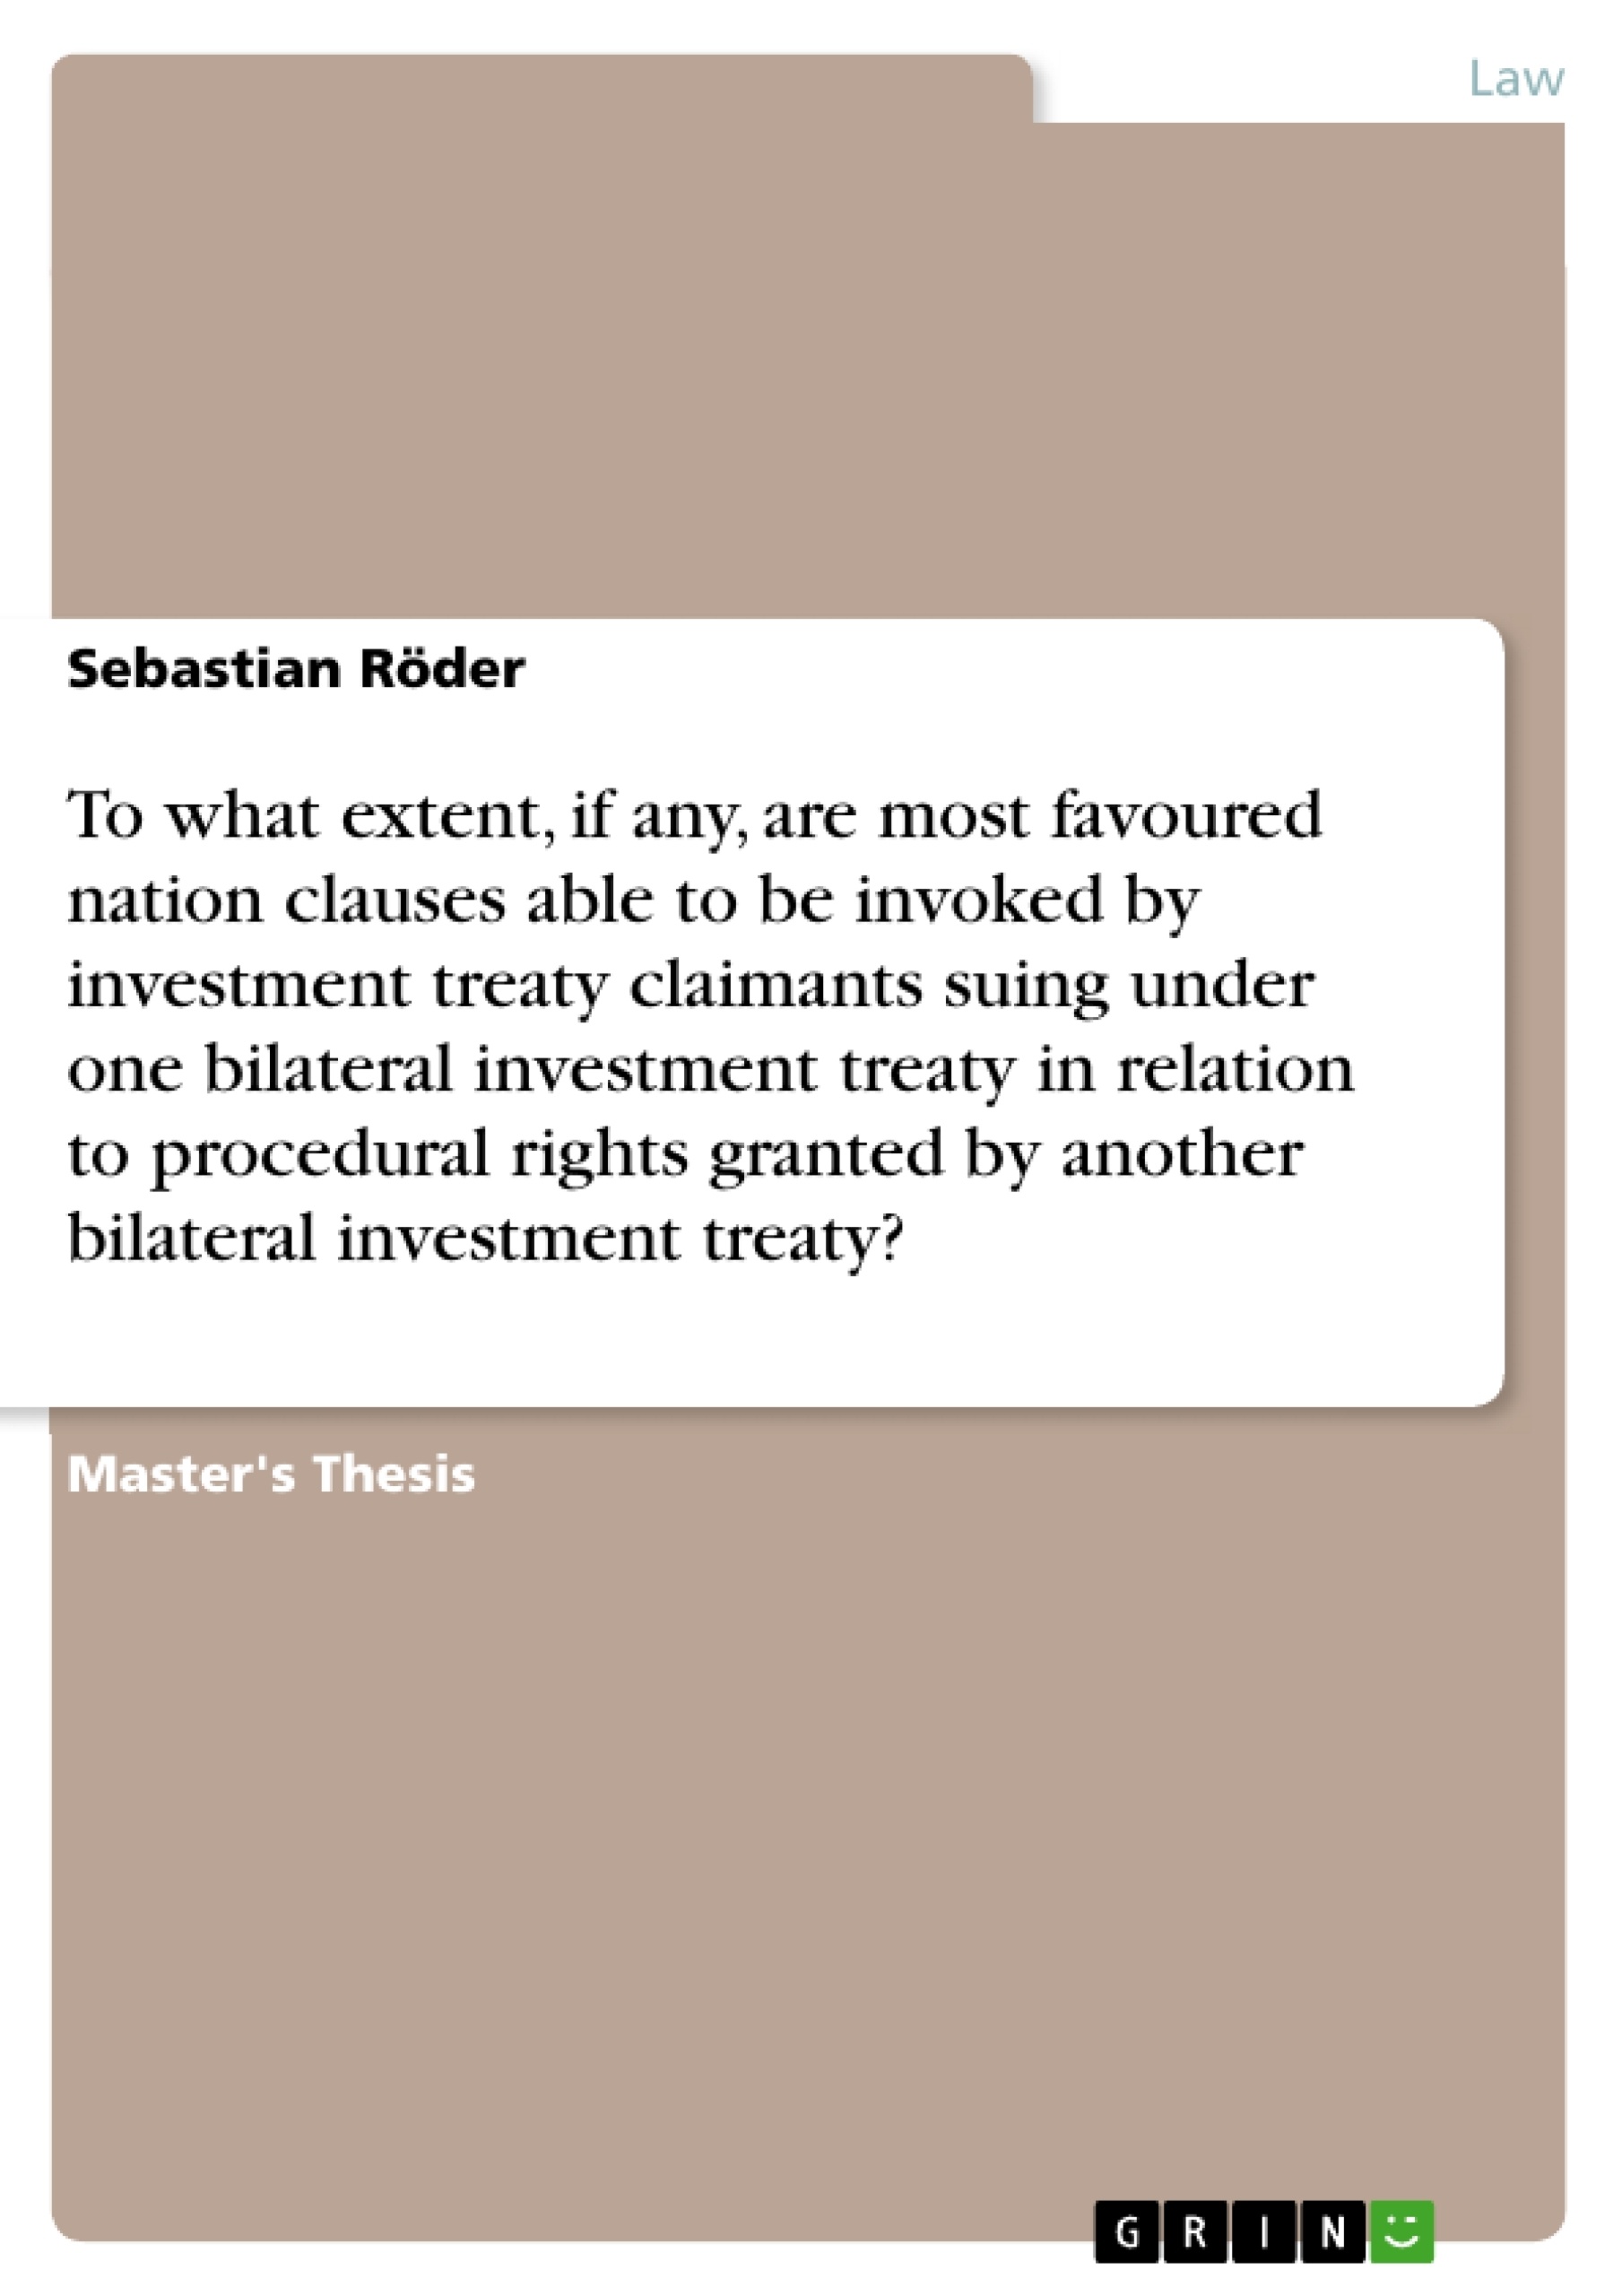 Titre: To what extent, if any, are most favoured nation clauses able to be invoked by investment treaty claimants suing under one bilateral investment treaty in relation to procedural rights granted by another bilateral investment treaty?